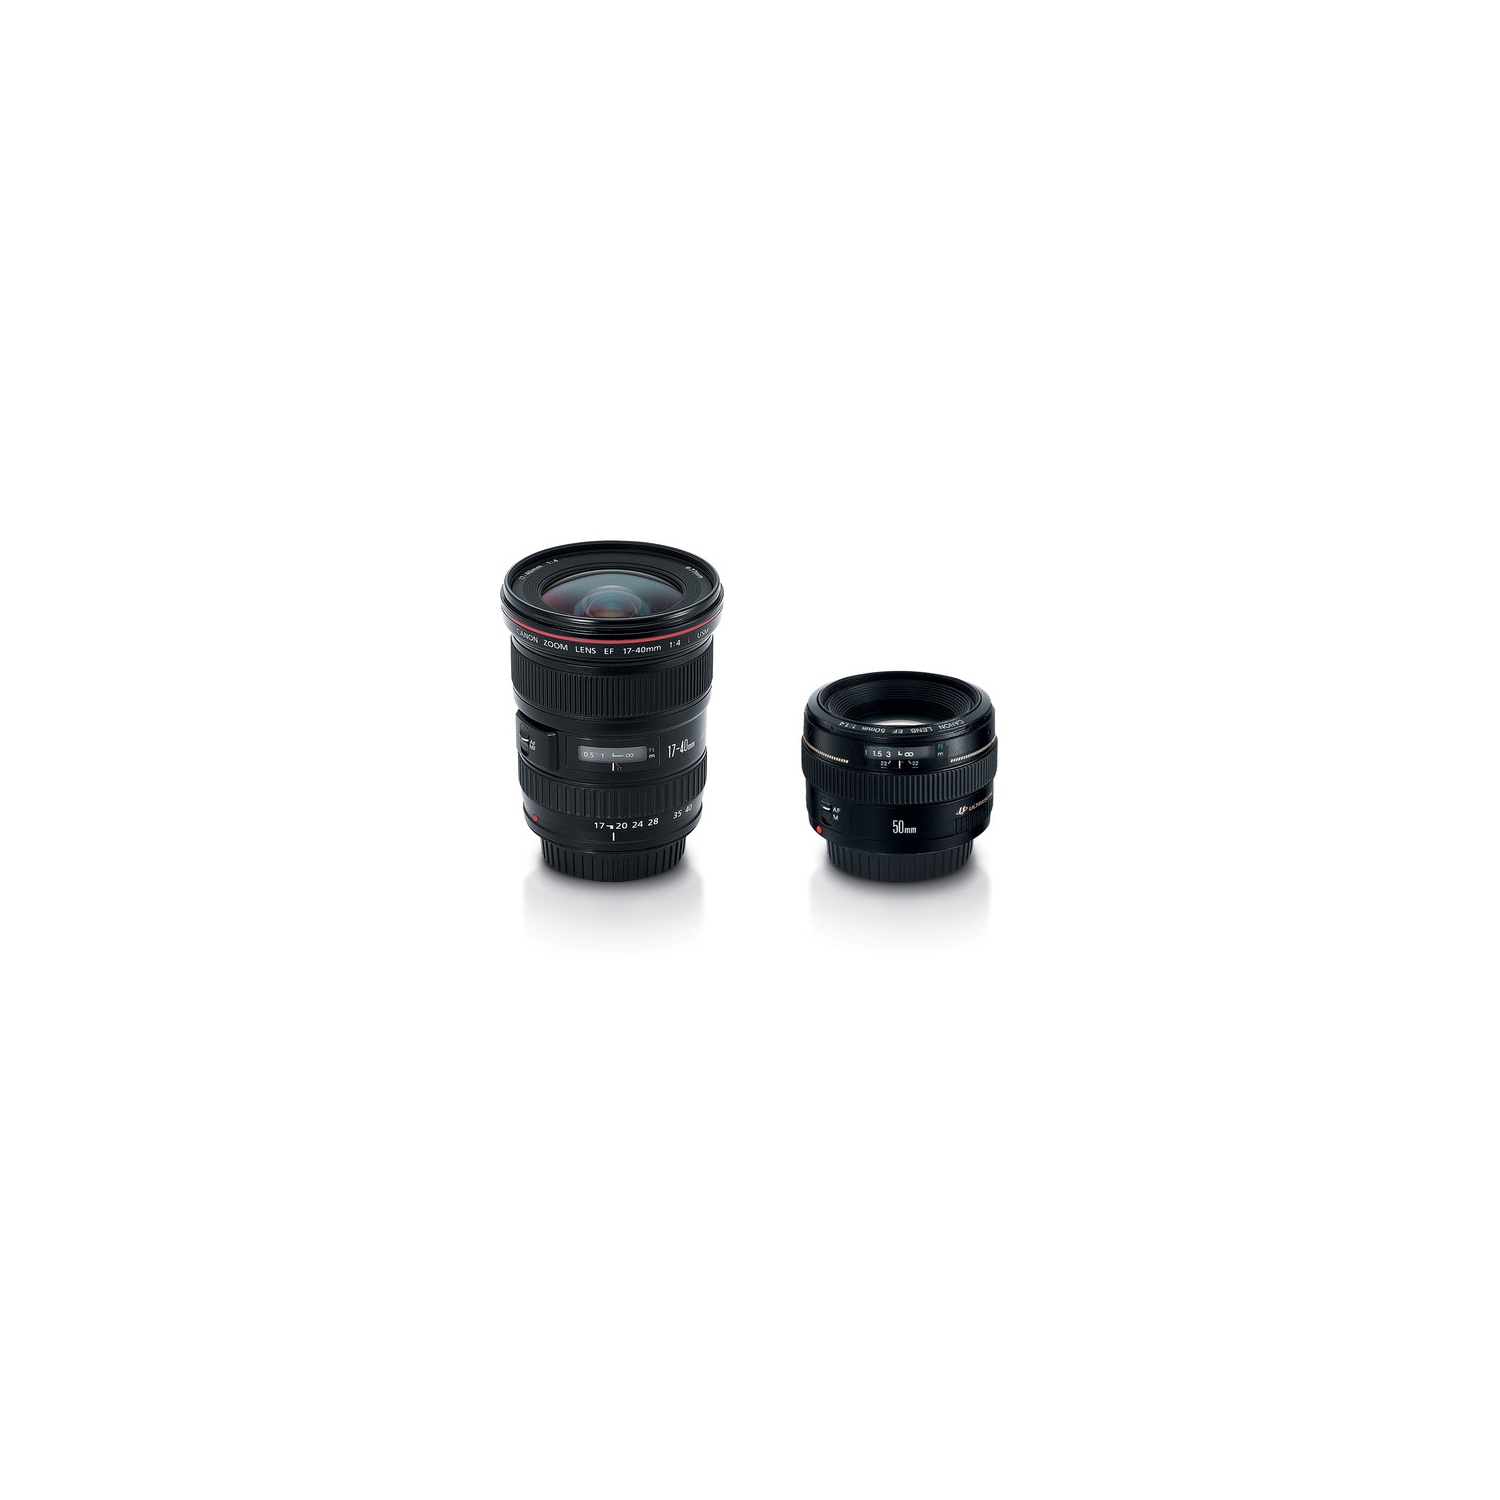 Canon Advanced Two Lens Kit with 50mm f/1.4 and 17-40mm f/4L Lenses - US Version w/ Seller Warranty